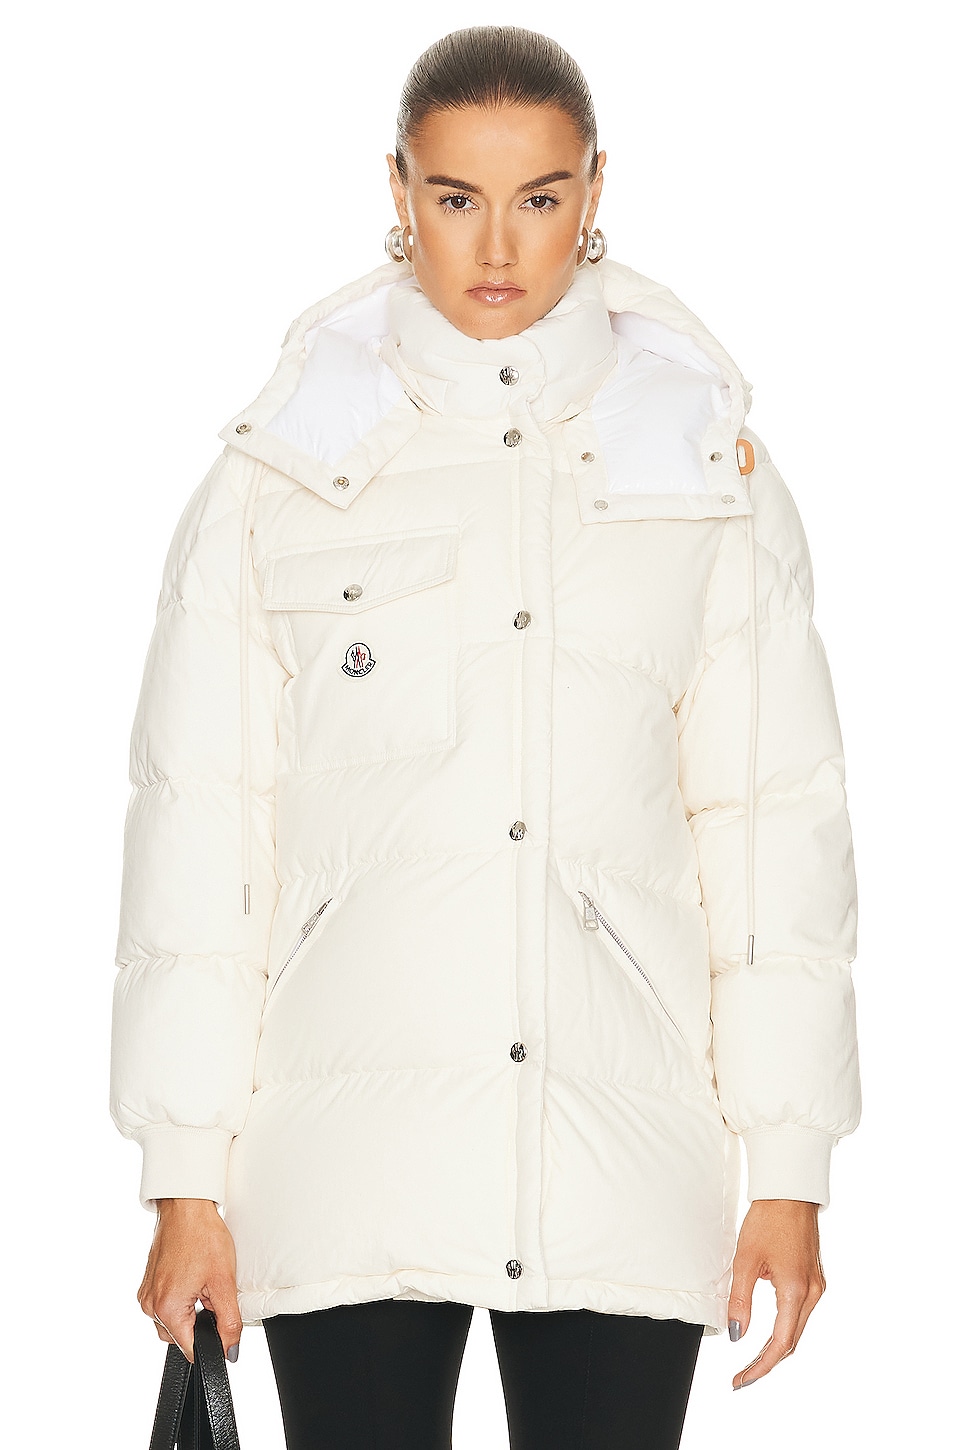 Image 1 of Moncler Expedition 1954 Jacket in White